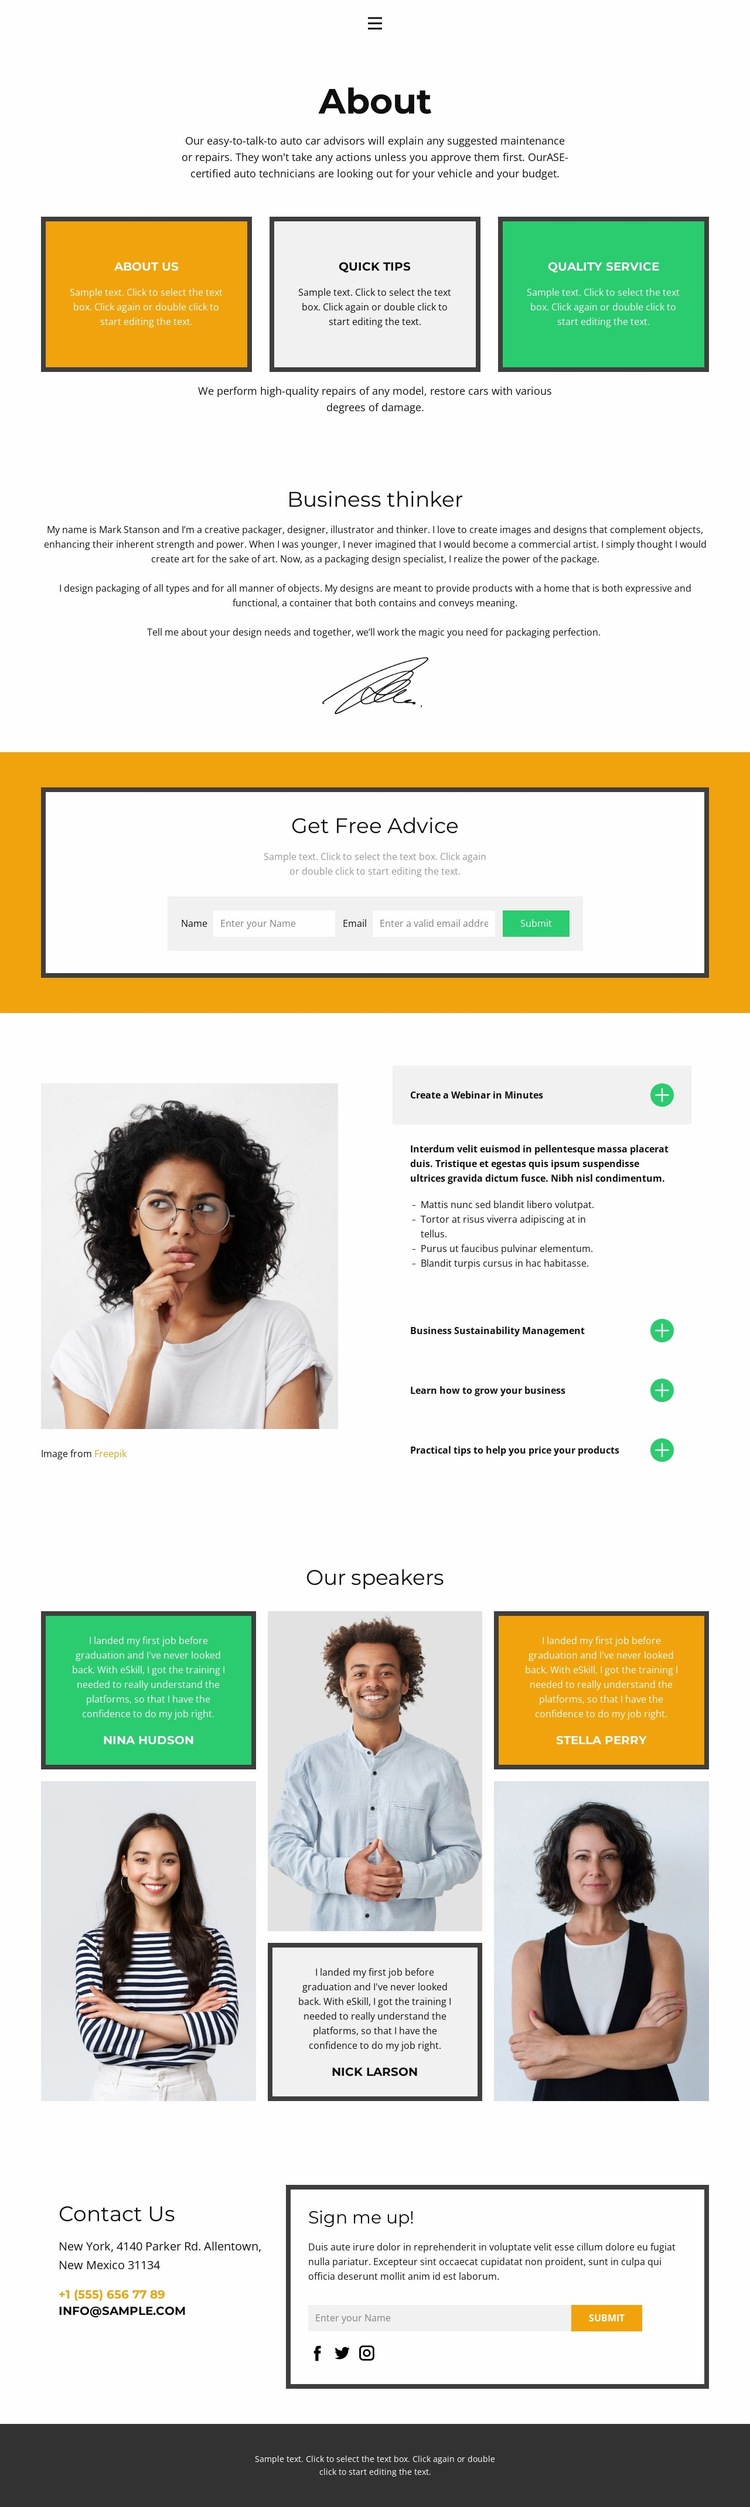 Read and find answers Website Builder Templates